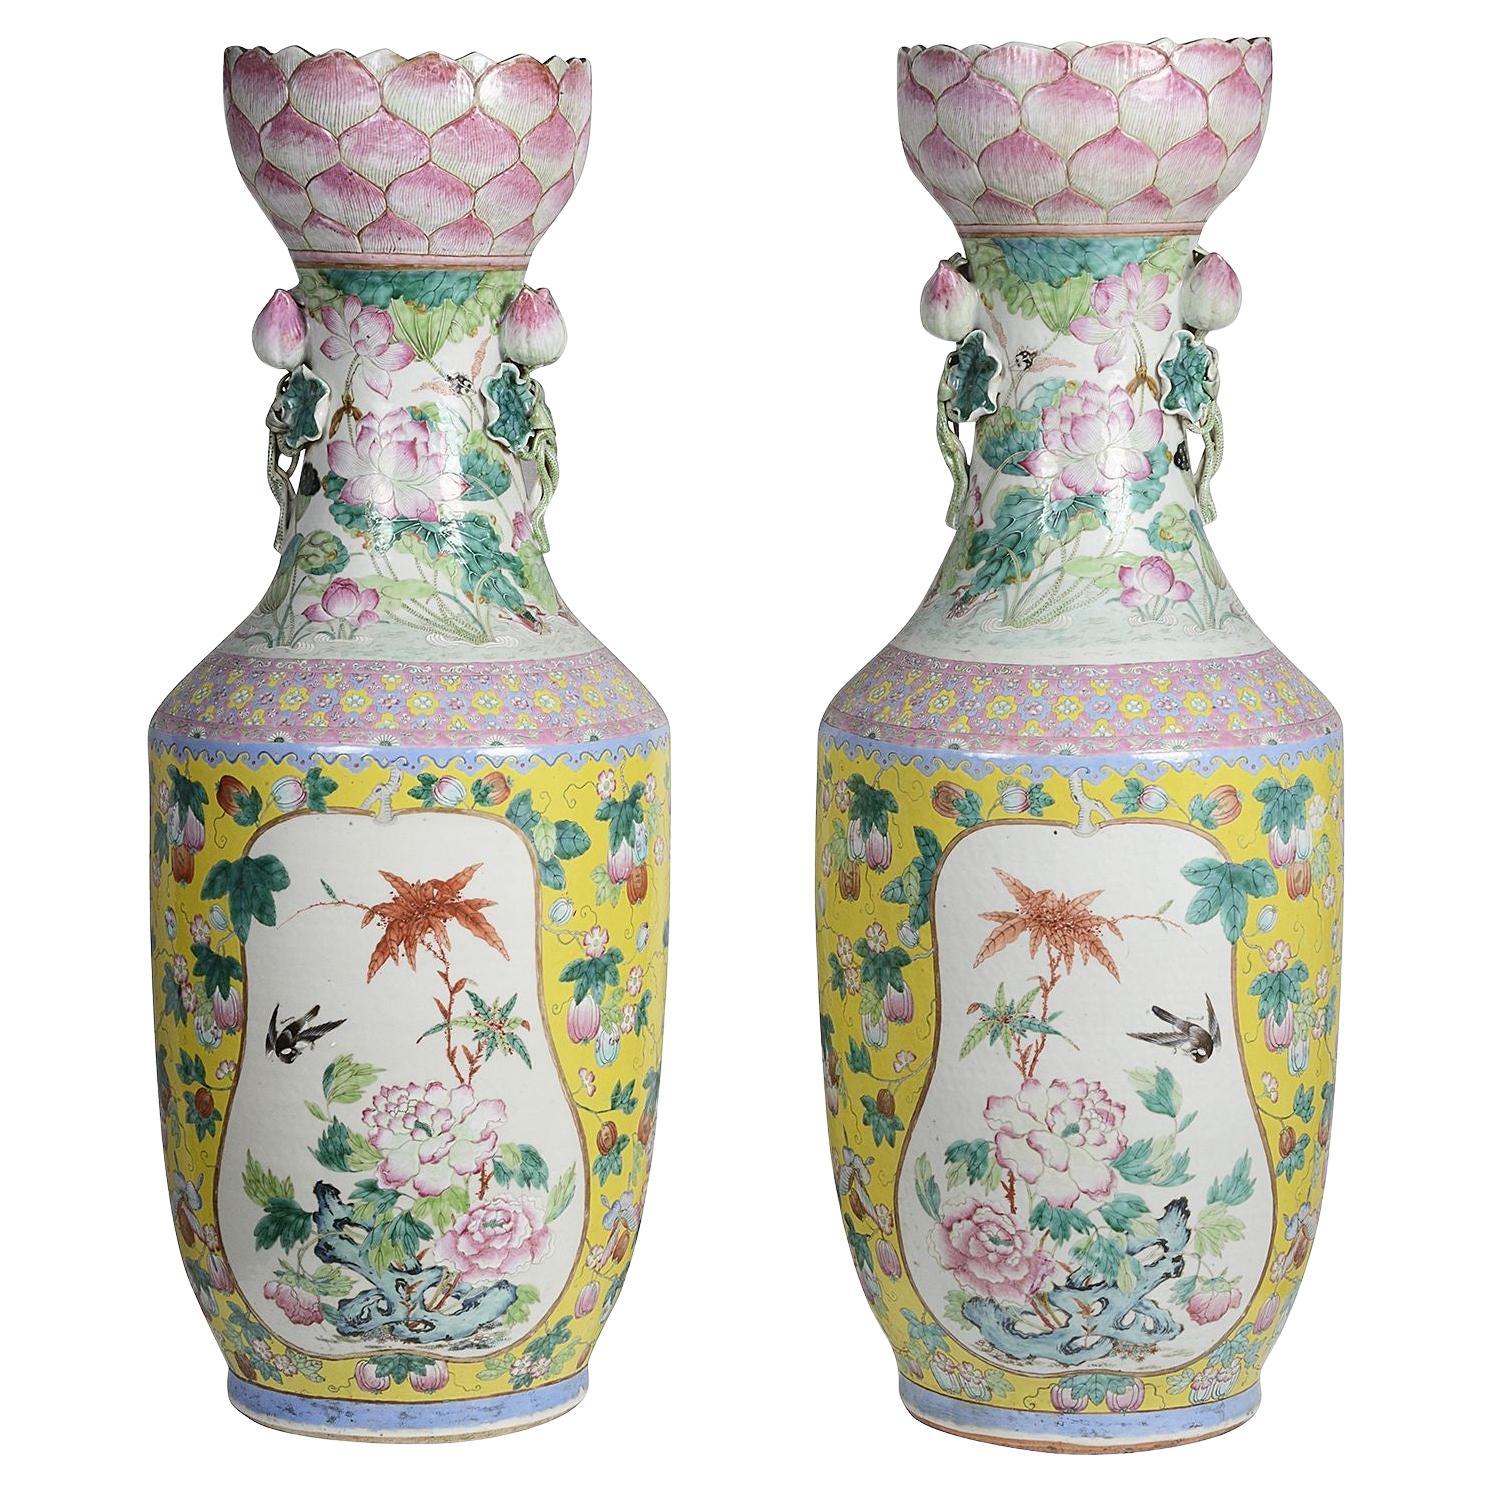 Rare Pair of 19th Century Chinese Famille Rose Vases For Sale